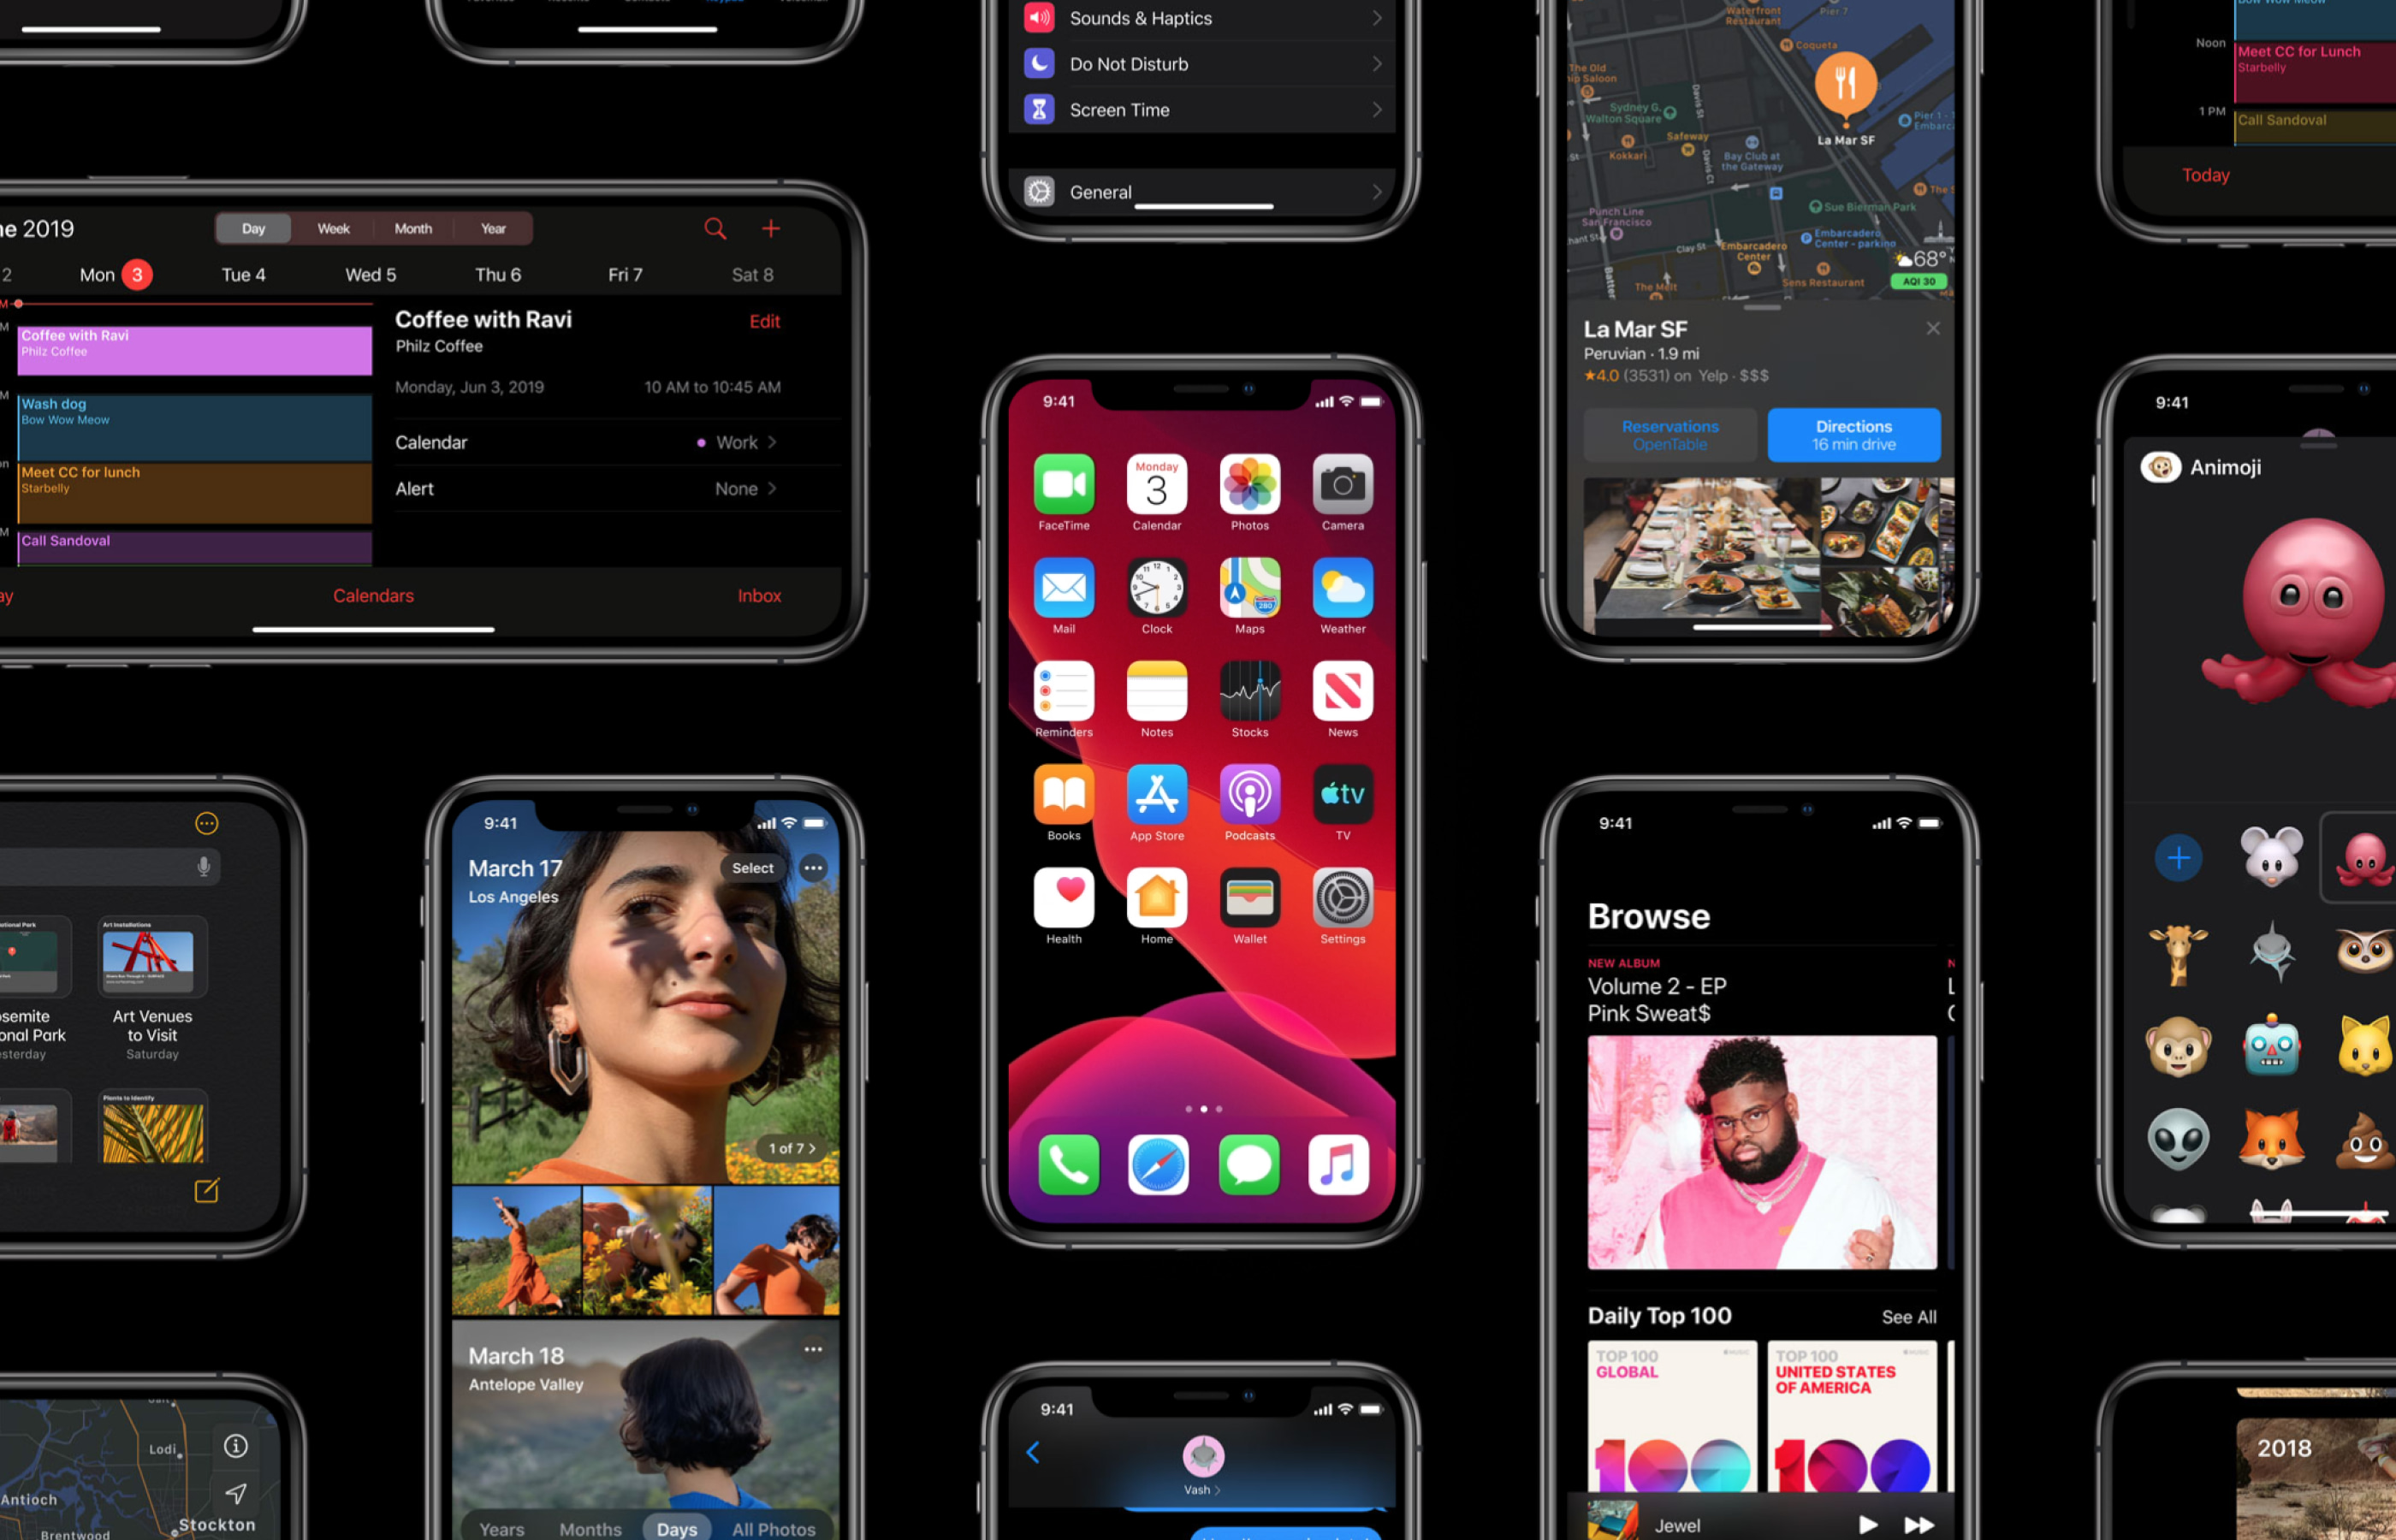 Calculator design idea #131: Apple introducing an entirely new OS for iPhone, iPad and its Watch - #WWDC19